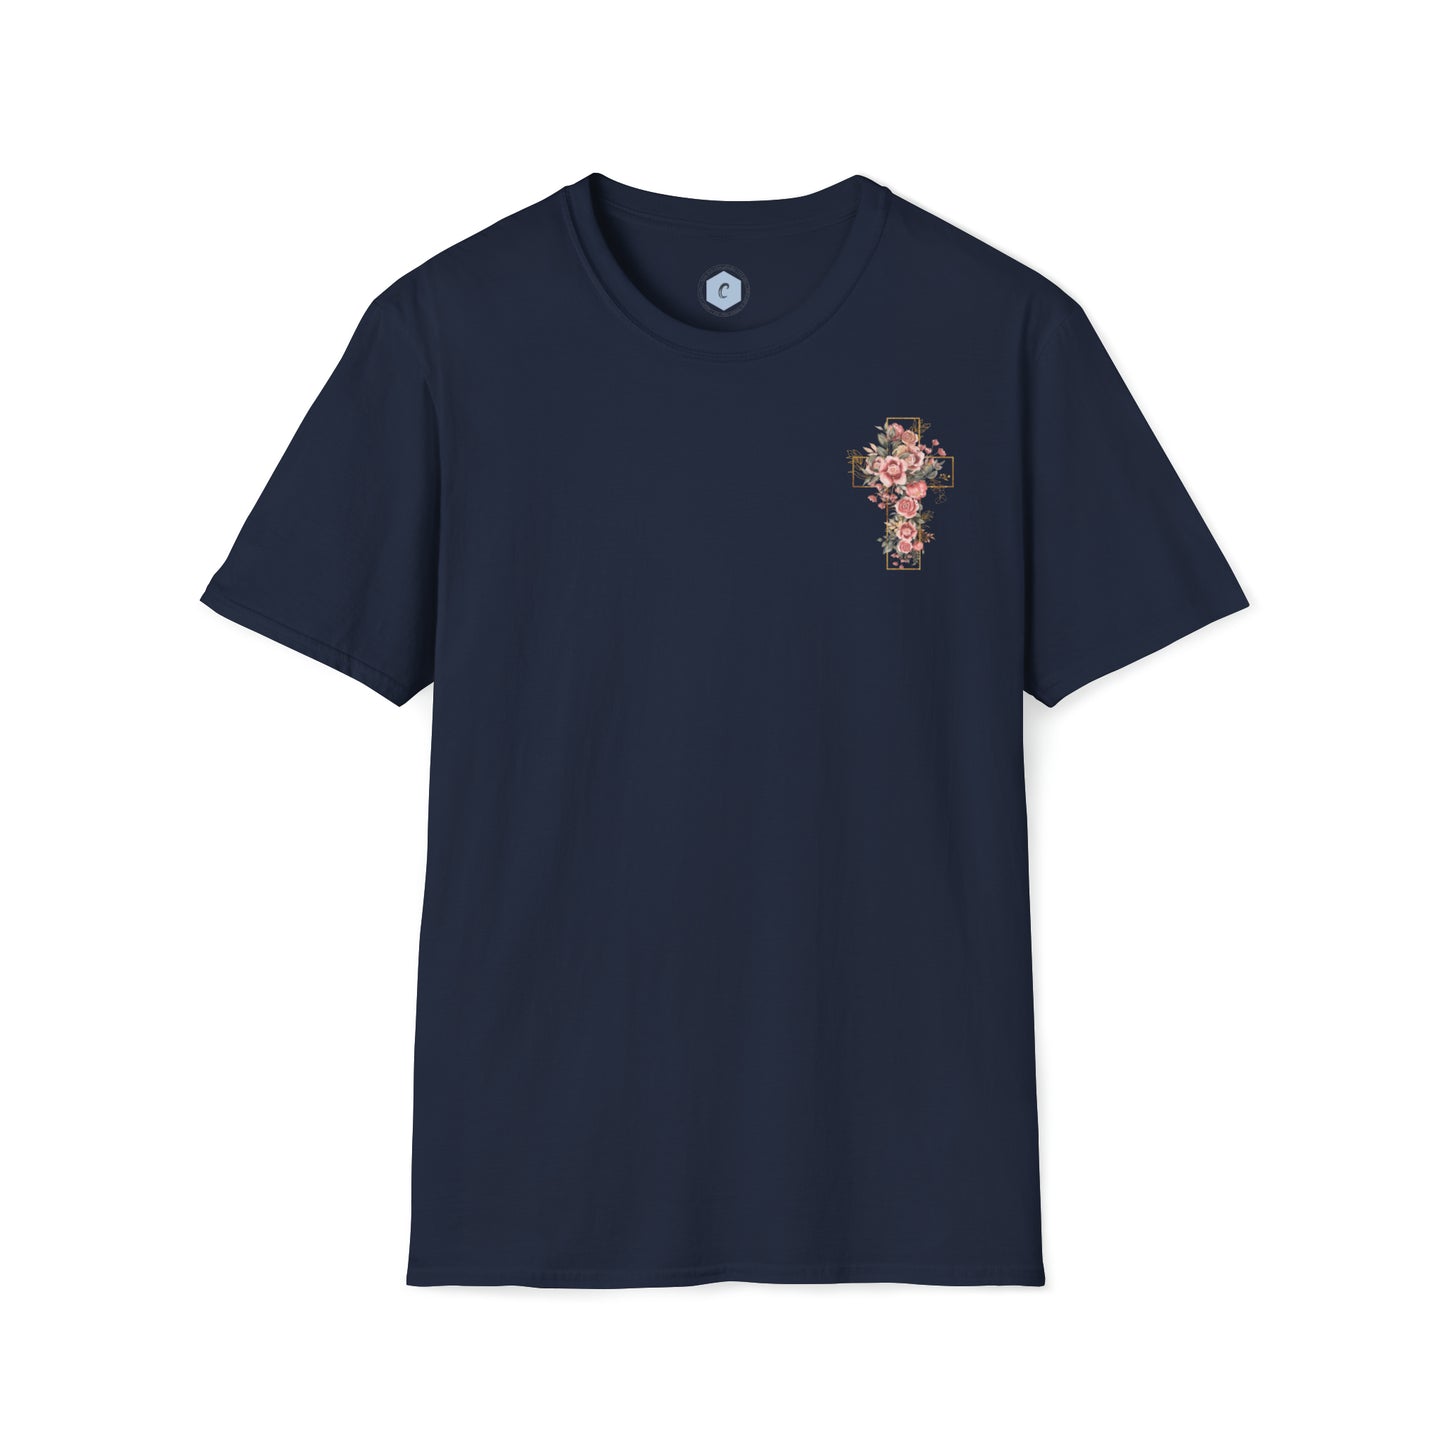 Unisex Blooming Flower Cross Softstyle T-Shirt